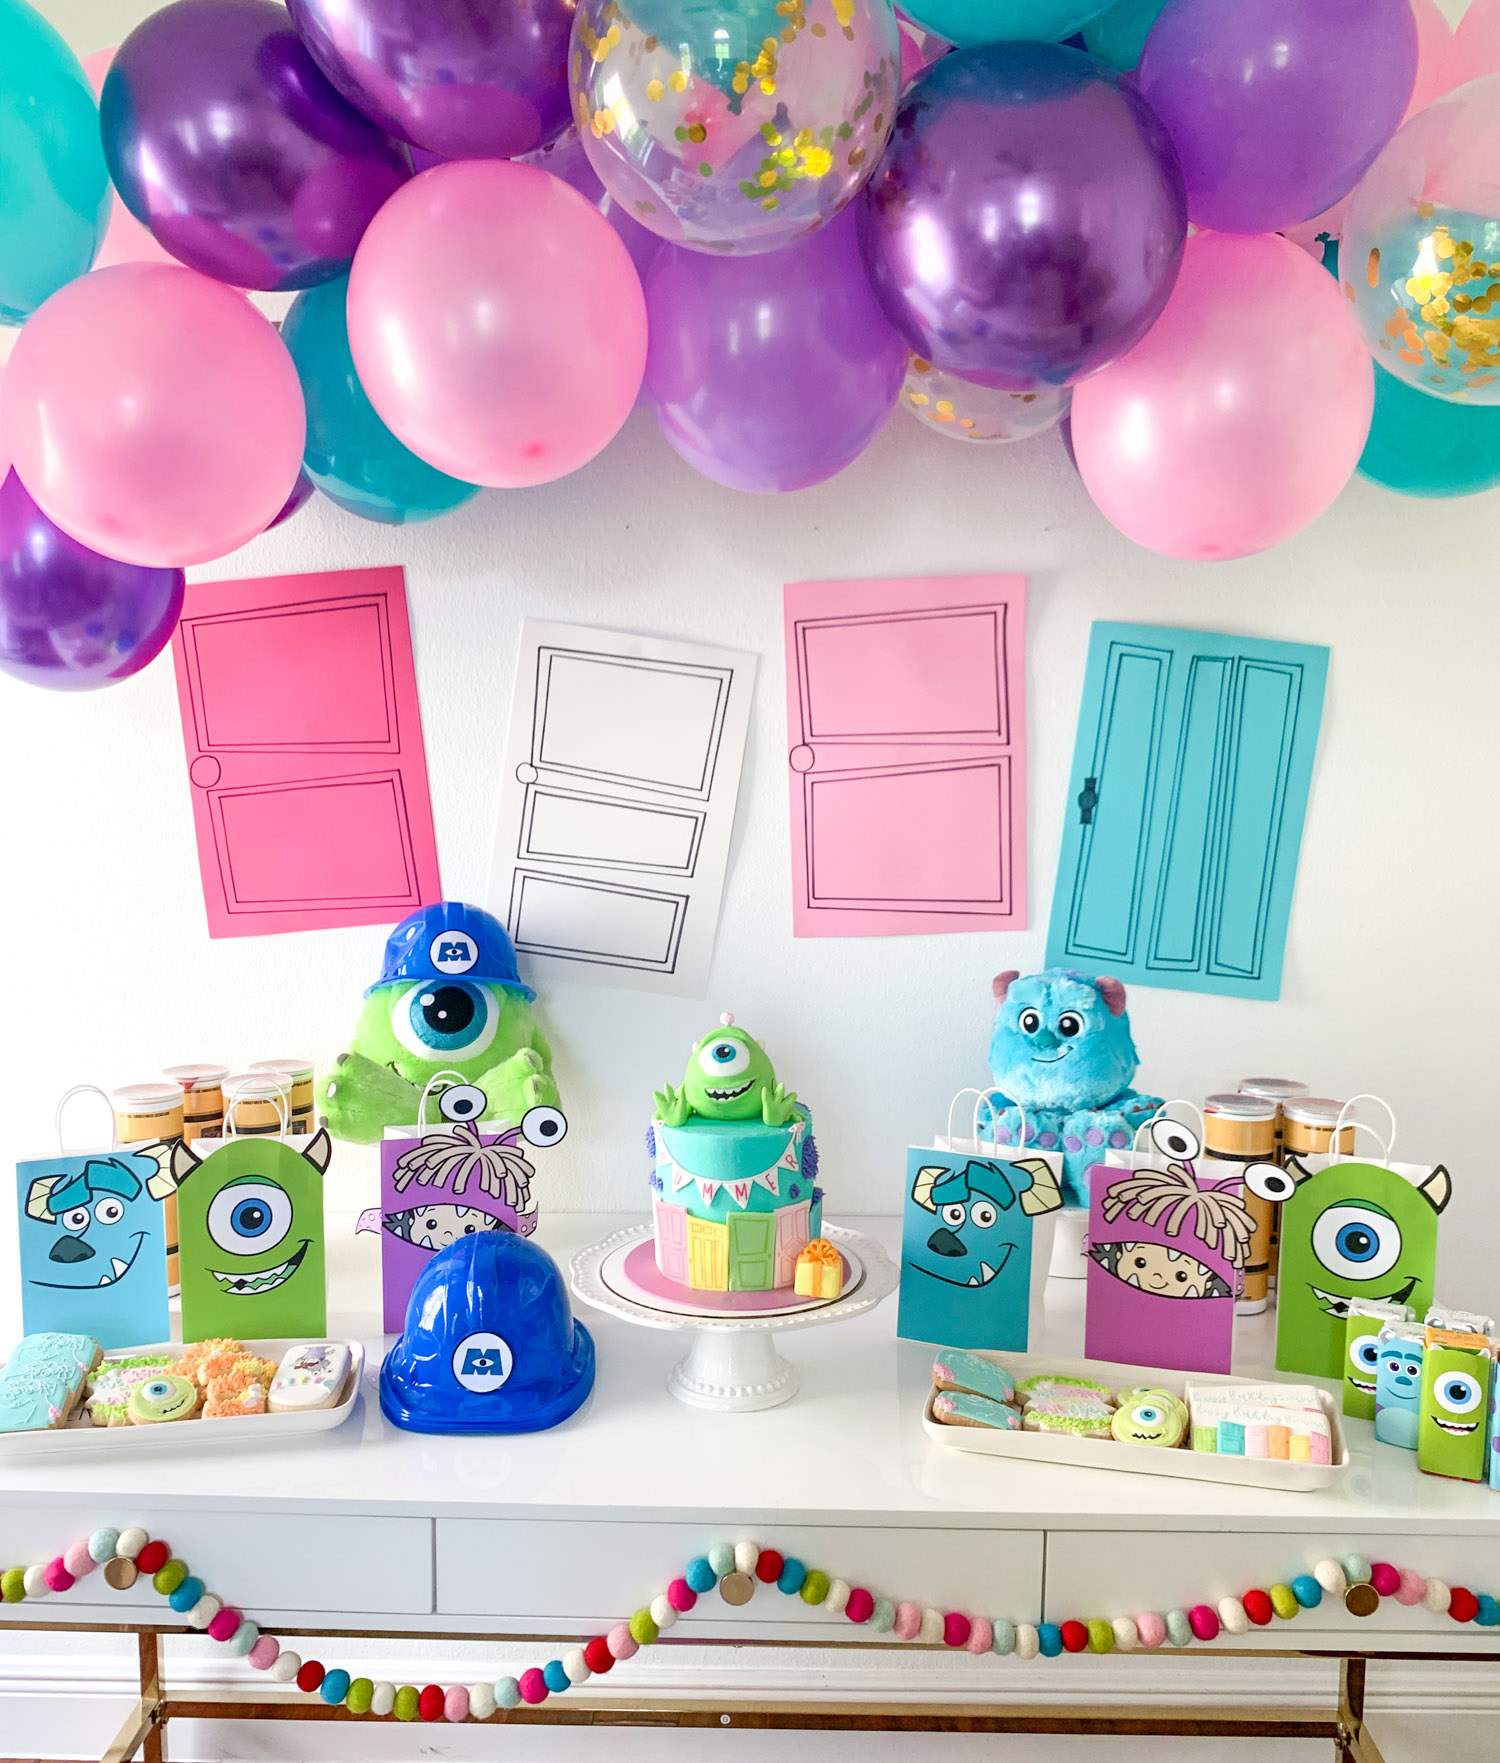 monsters-inc-birthday-party-cheap-sell-save-65-jlcatj-gob-mx